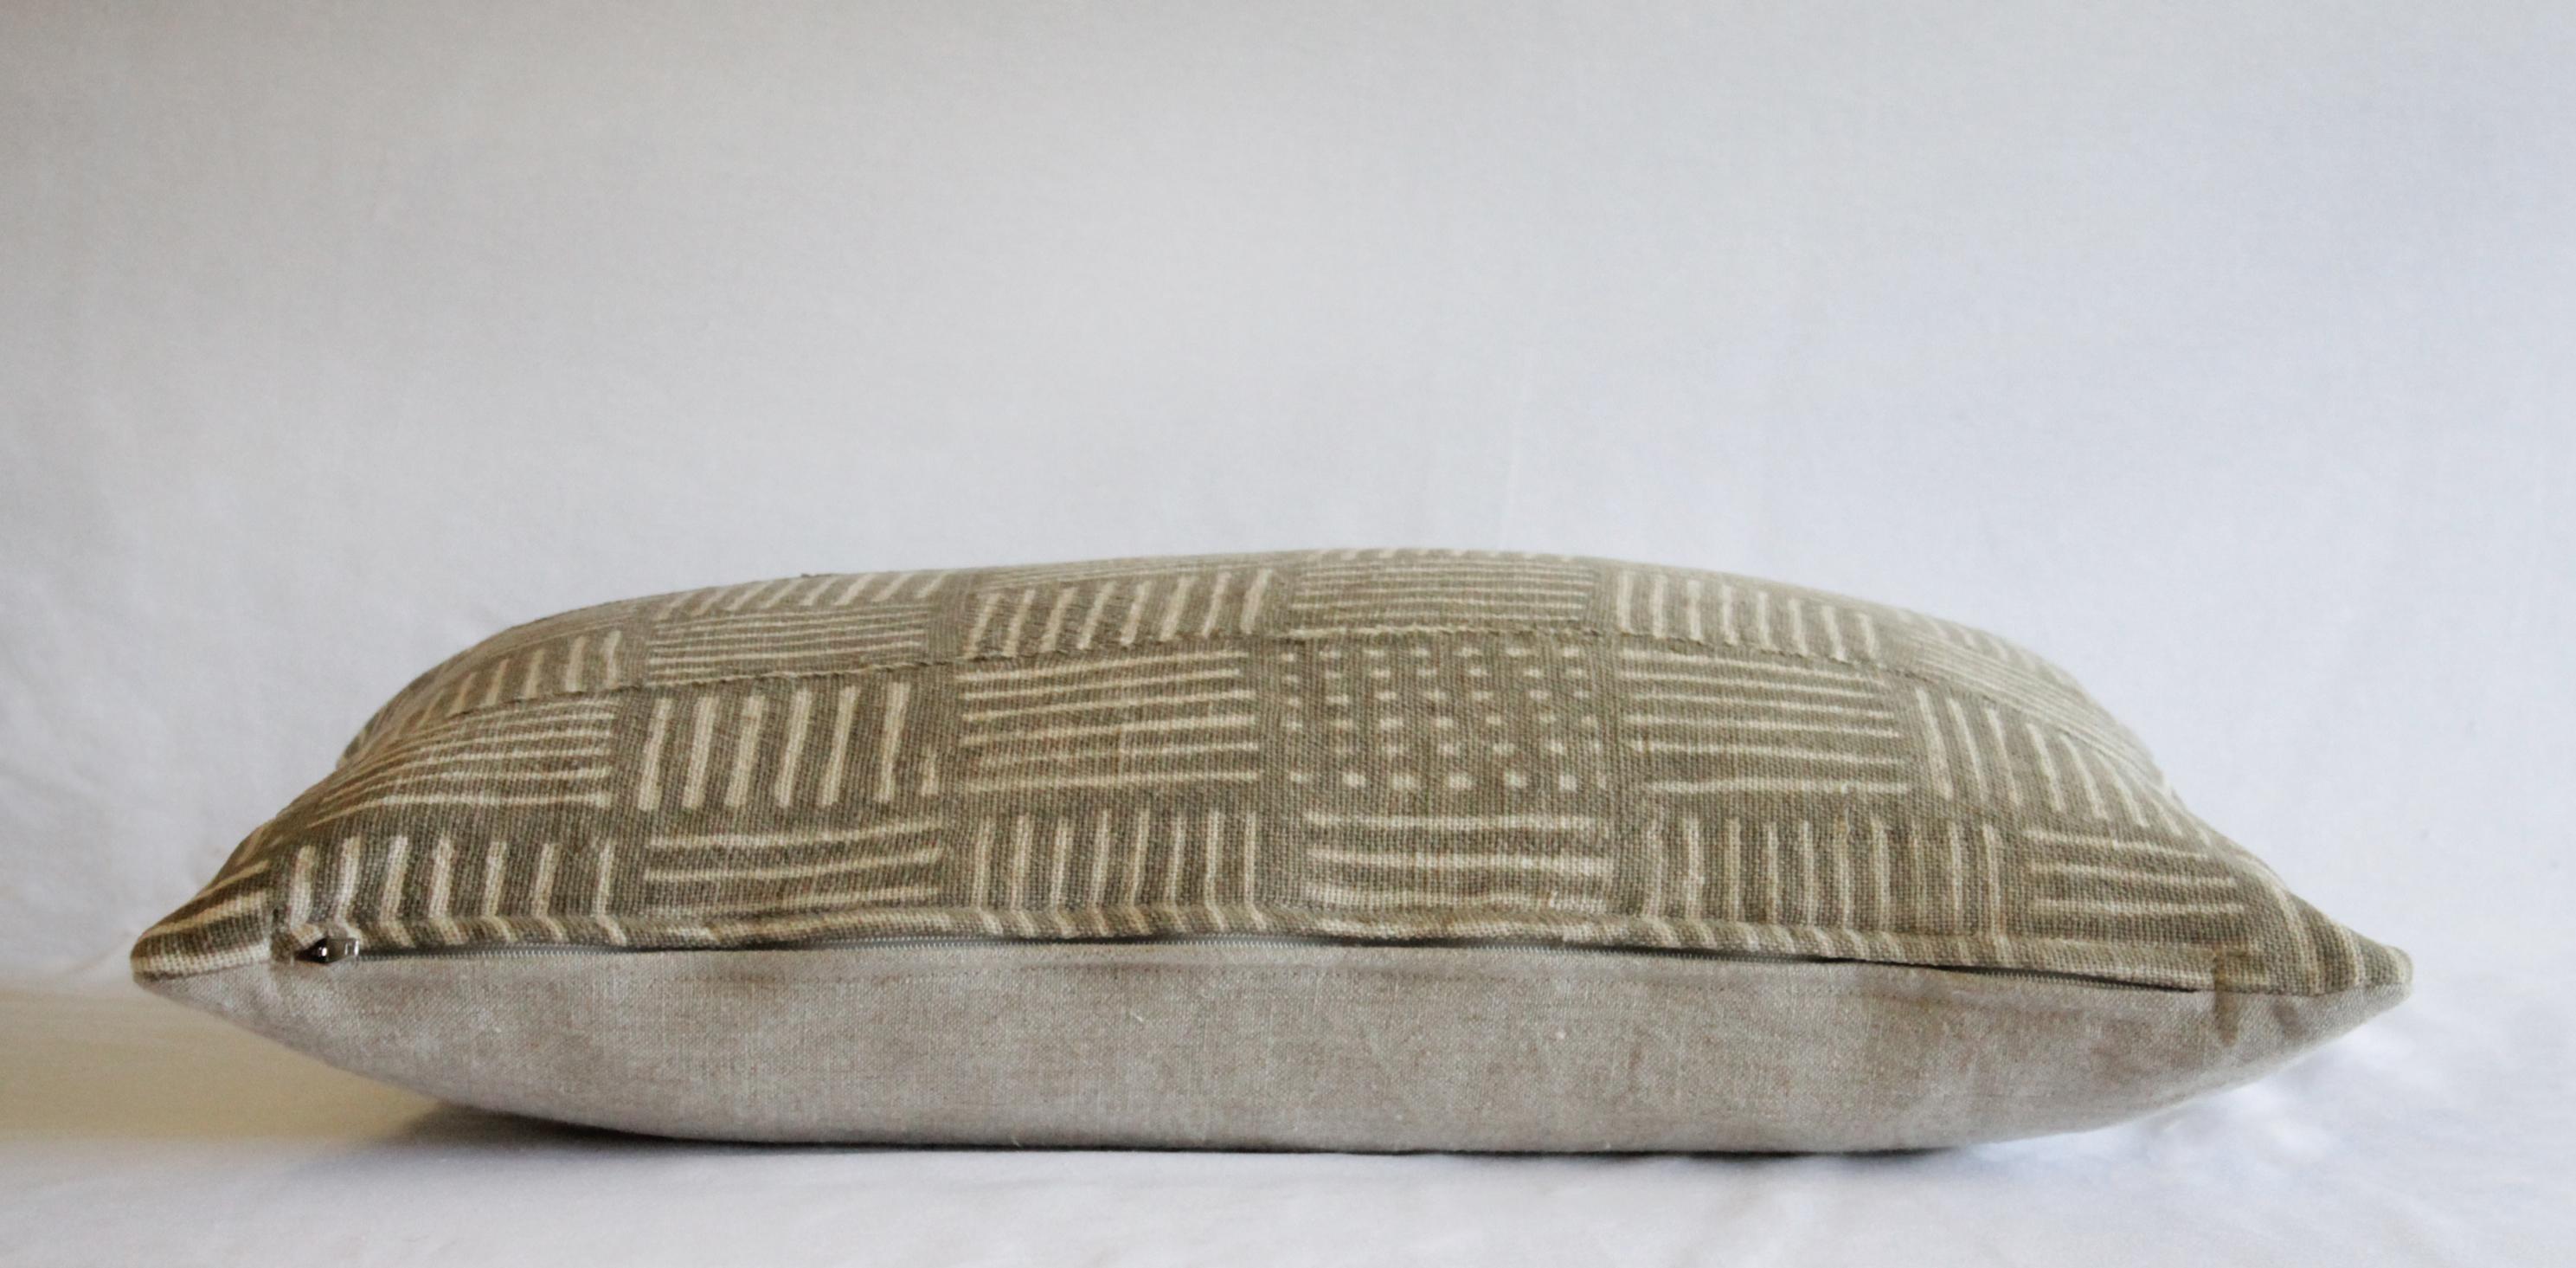 Antique tribal brown and cream nubby textile pillow.
 The backing is a nubby Belgian flax linen, natural color. Hidden zipper closure. 
Measues: 14